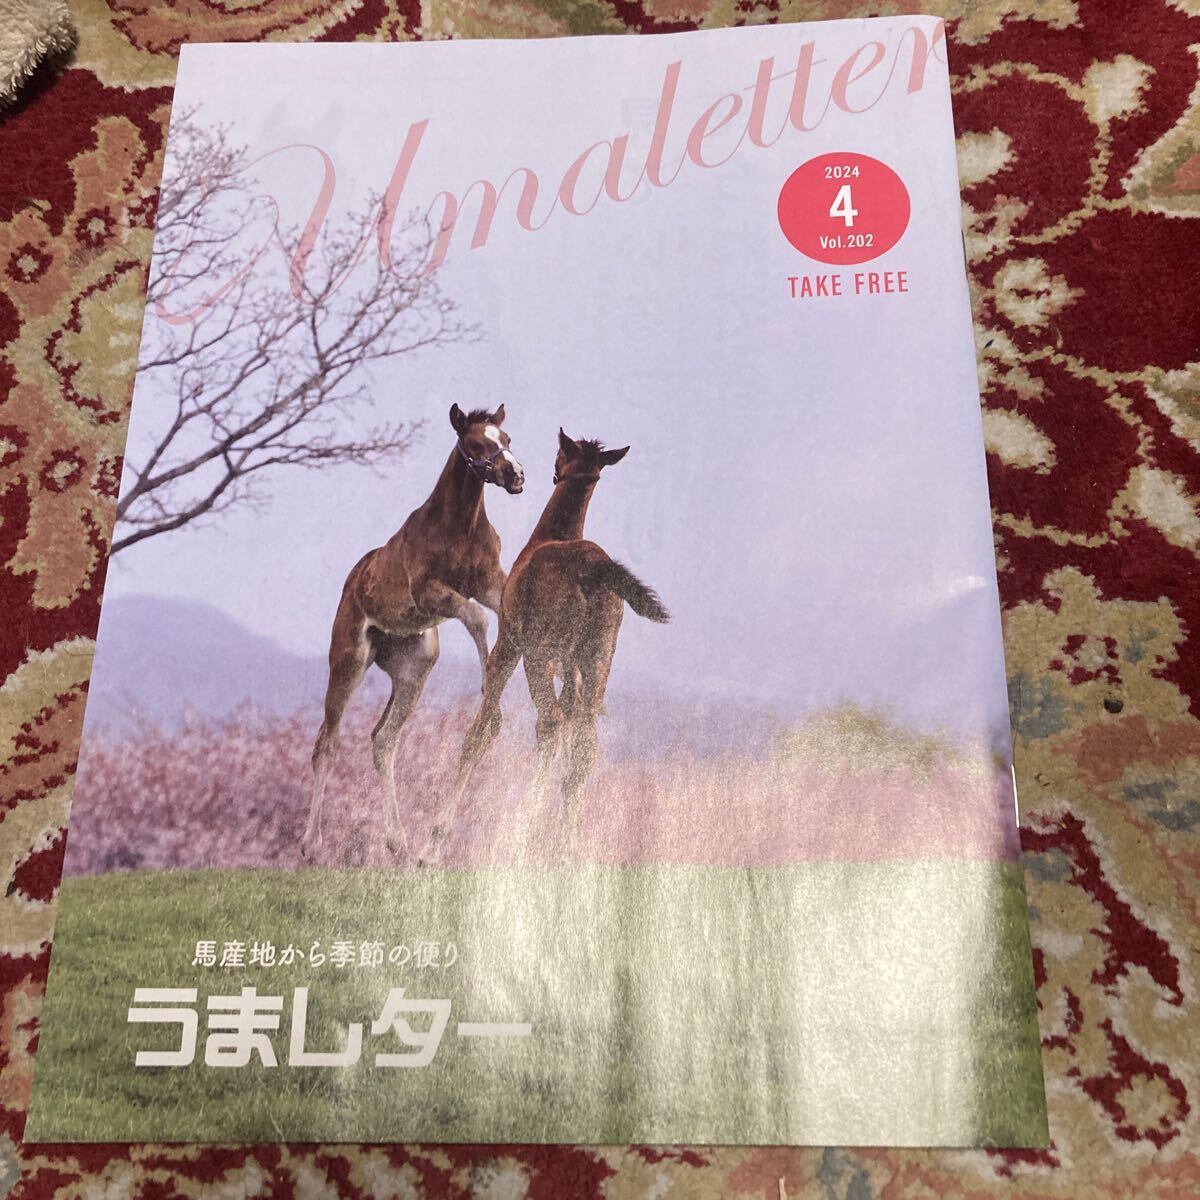  magazine [.. letter ~ horse production ground from season. flight .~]2024 year 4 month number Vol.202